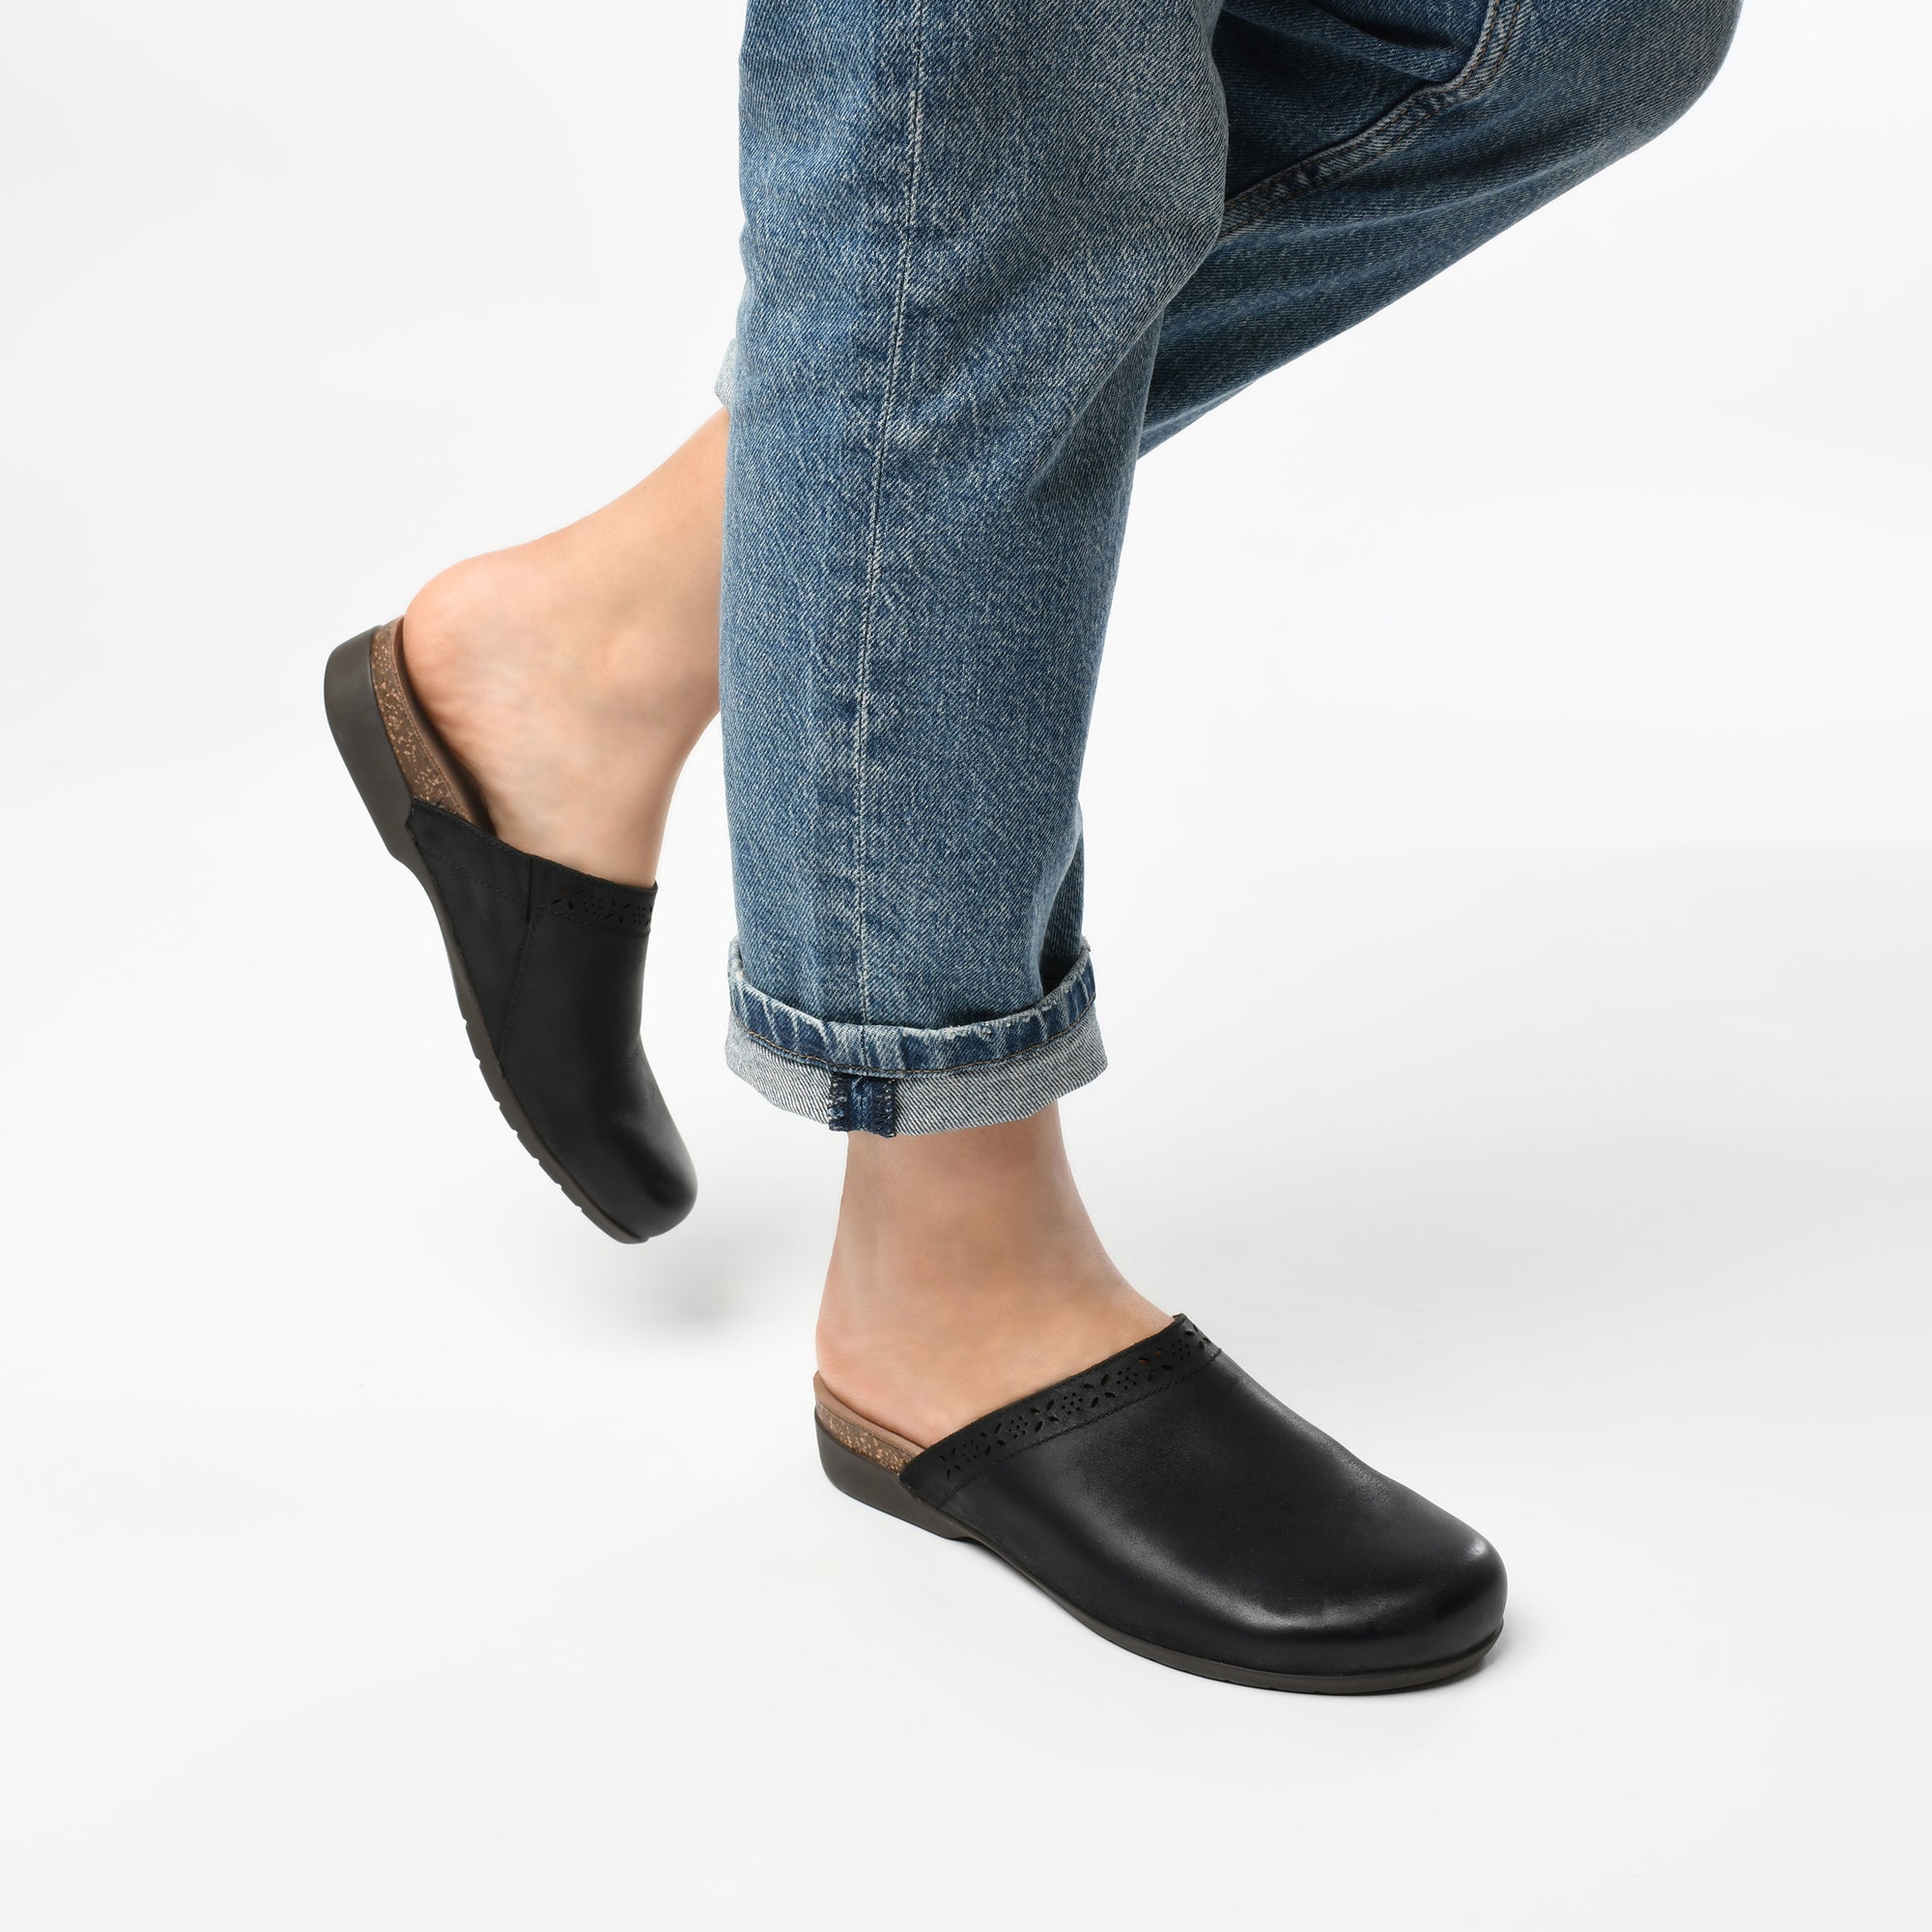 Black mules shown on foot.